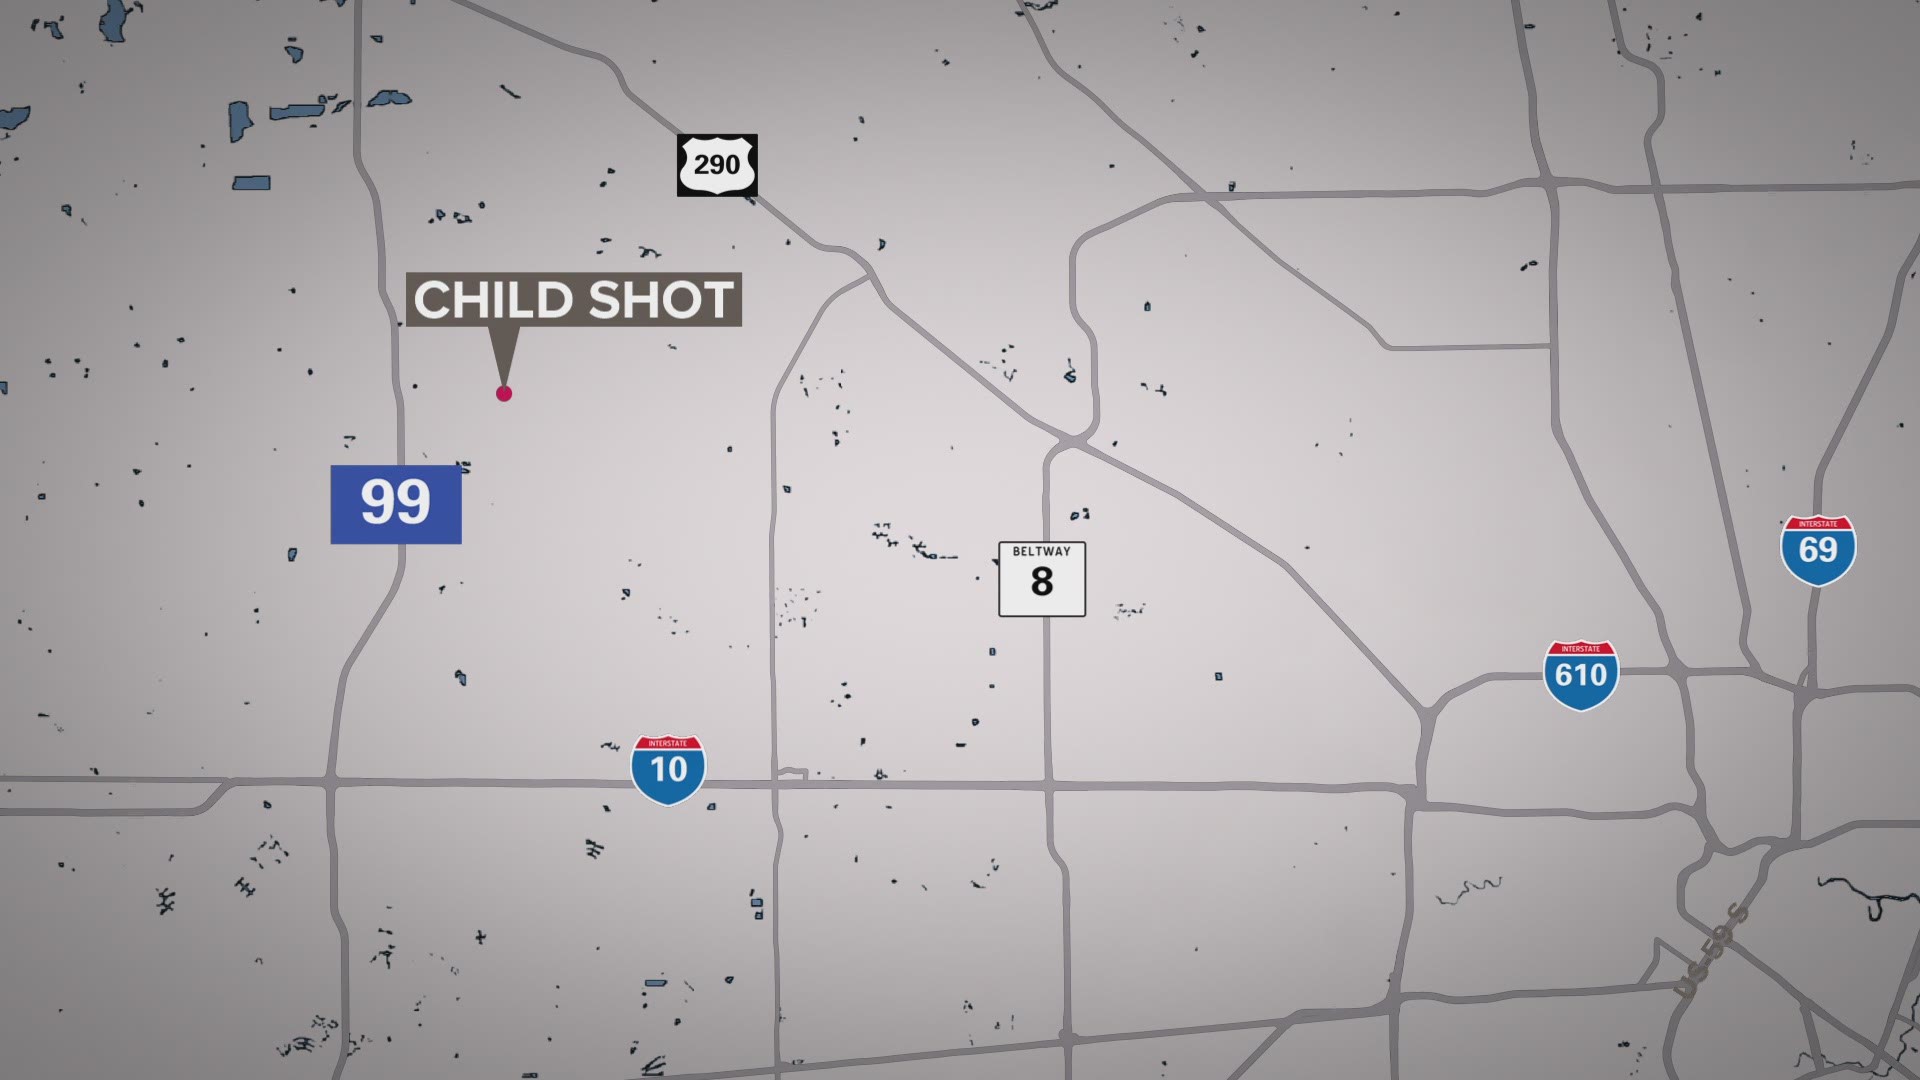 Harris County Sheriff’s deputies are investigating after a 10-year-old was shot Friday night in Cypress.